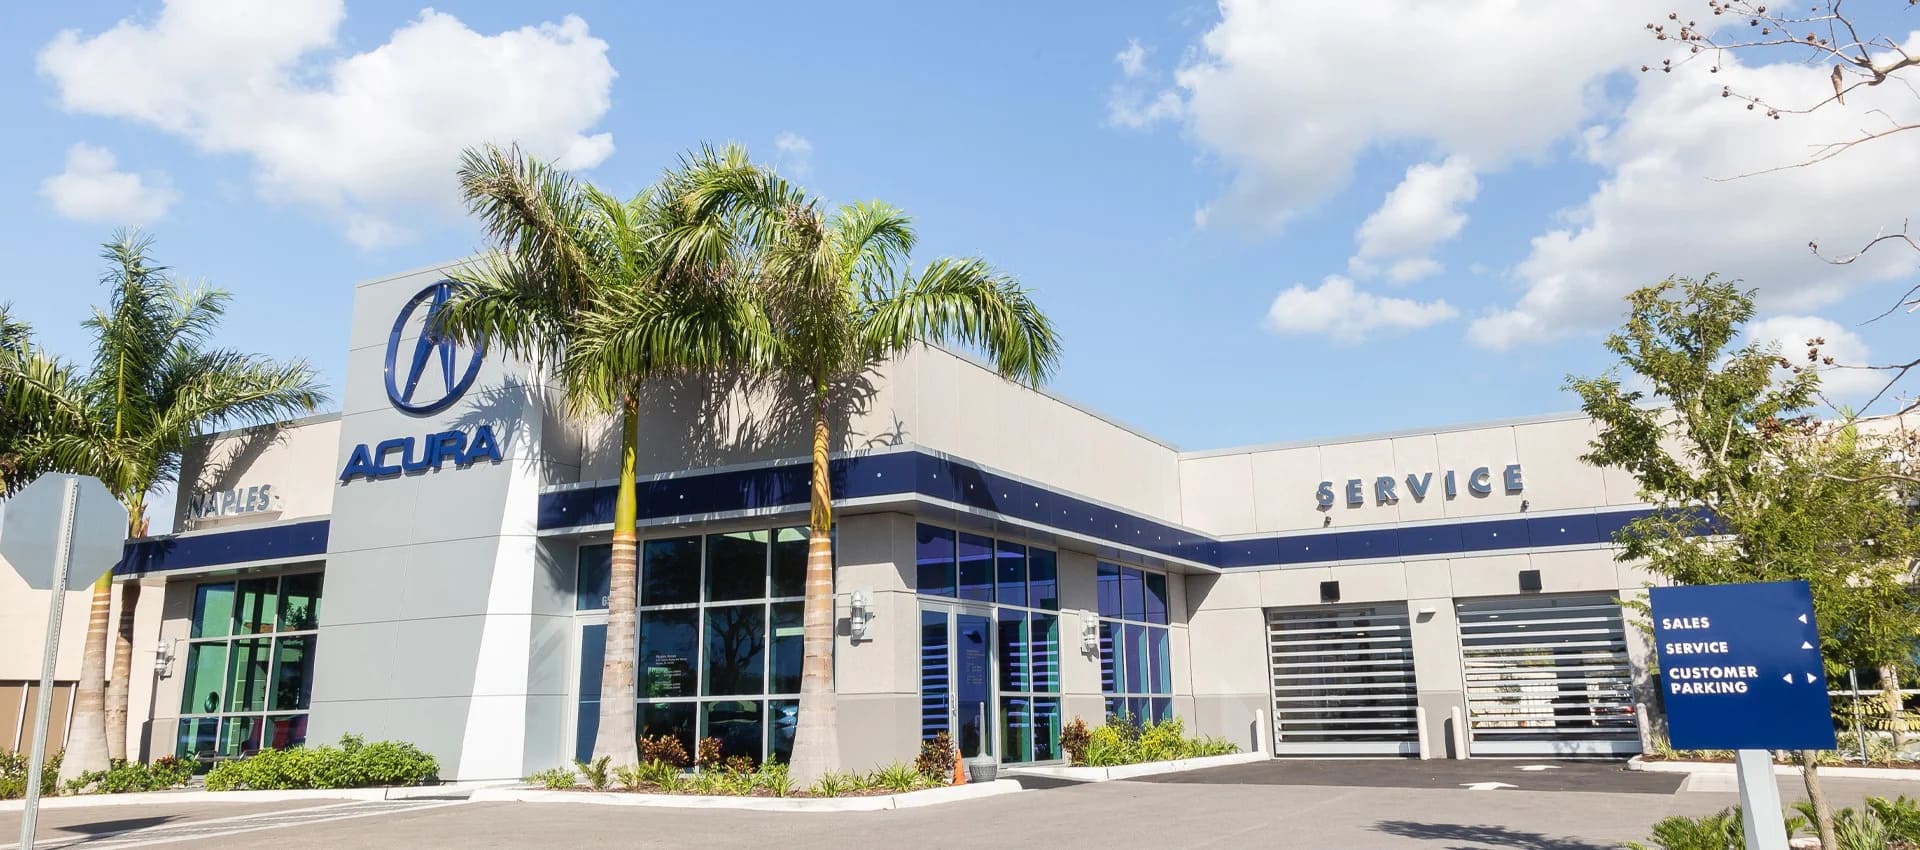 Naples Acura is your home for new and used Acura sales and service. Visit One of Naples's Premier Acura Dealerships today! 